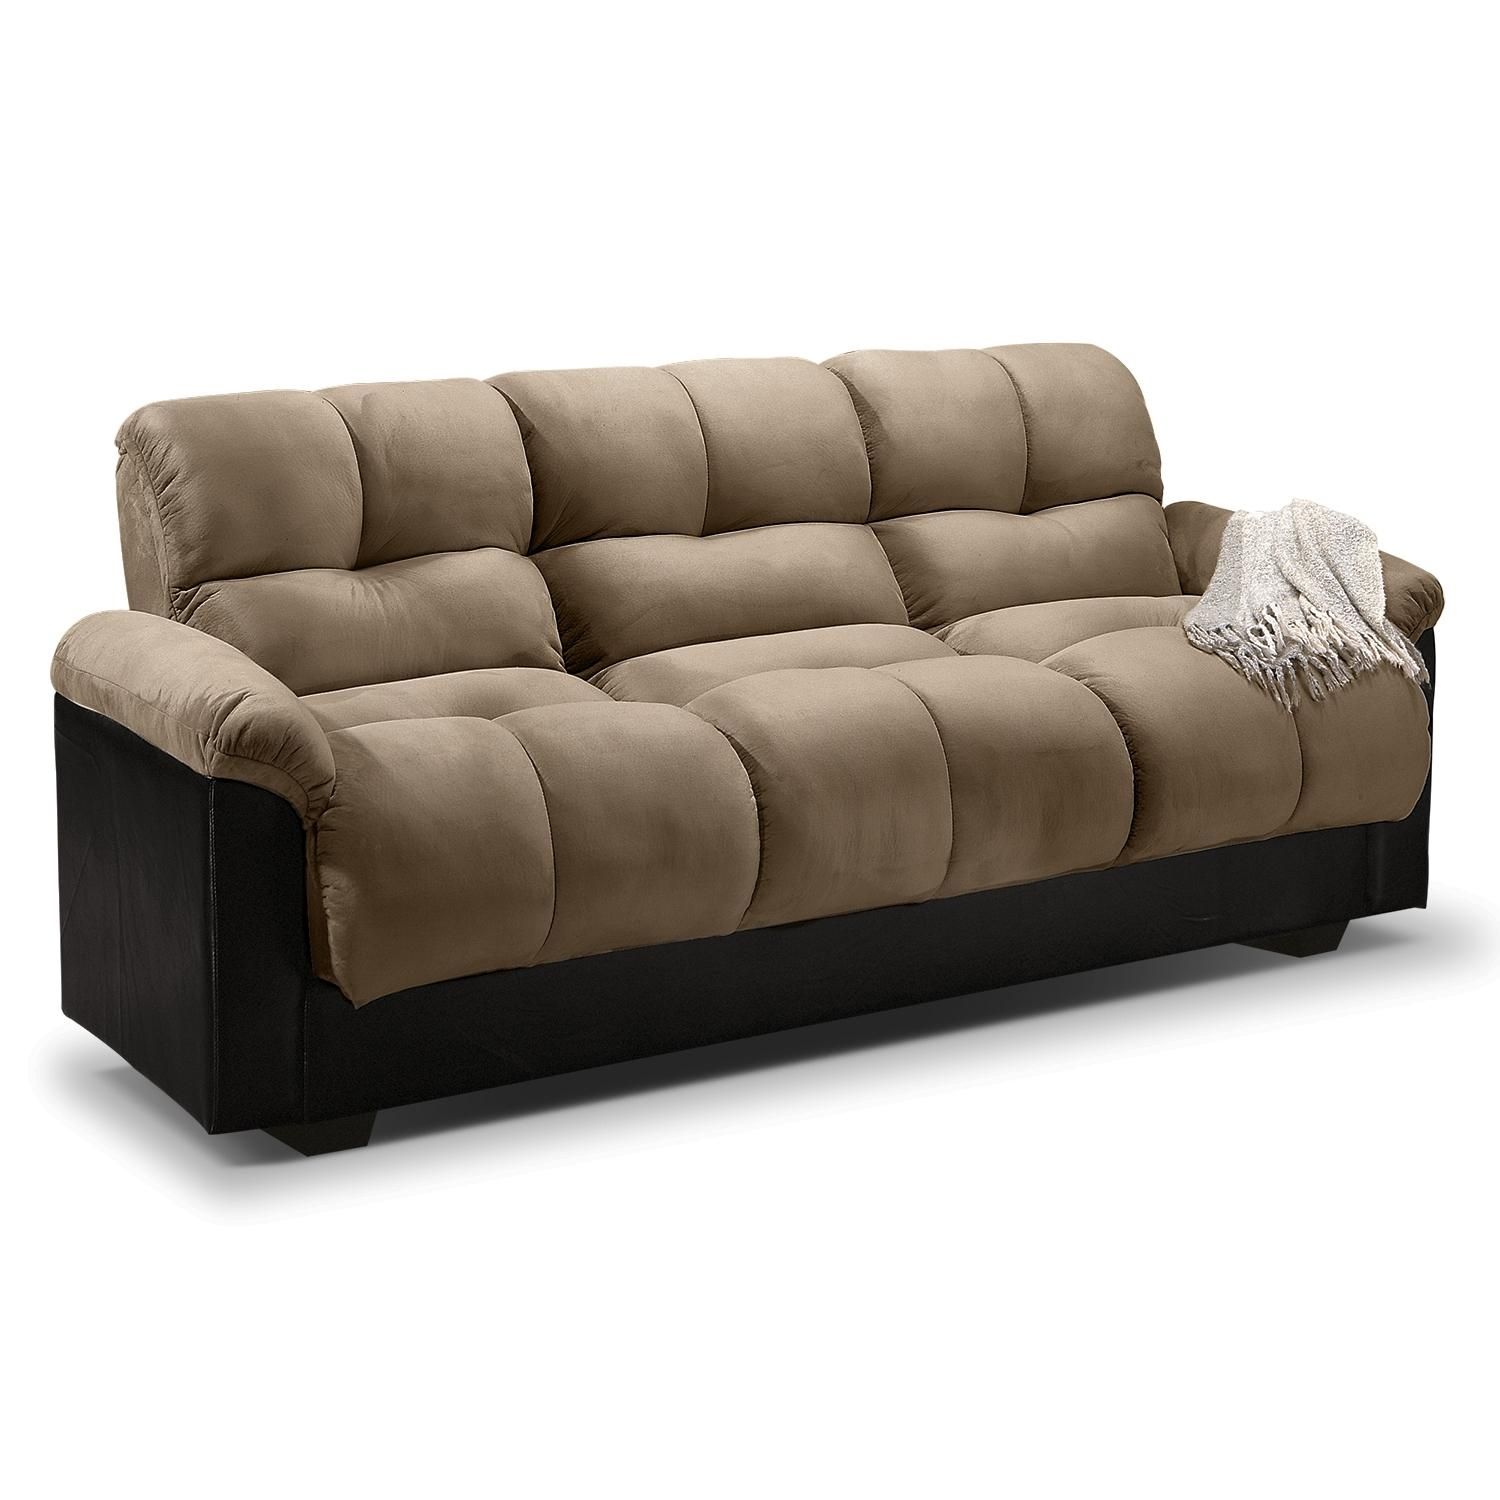 Storage Couches, Convertible Sofa Bed Queen Size Convertible Sofa Pertaining To Queen Size Convertible Sofa Beds (View 13 of 20)